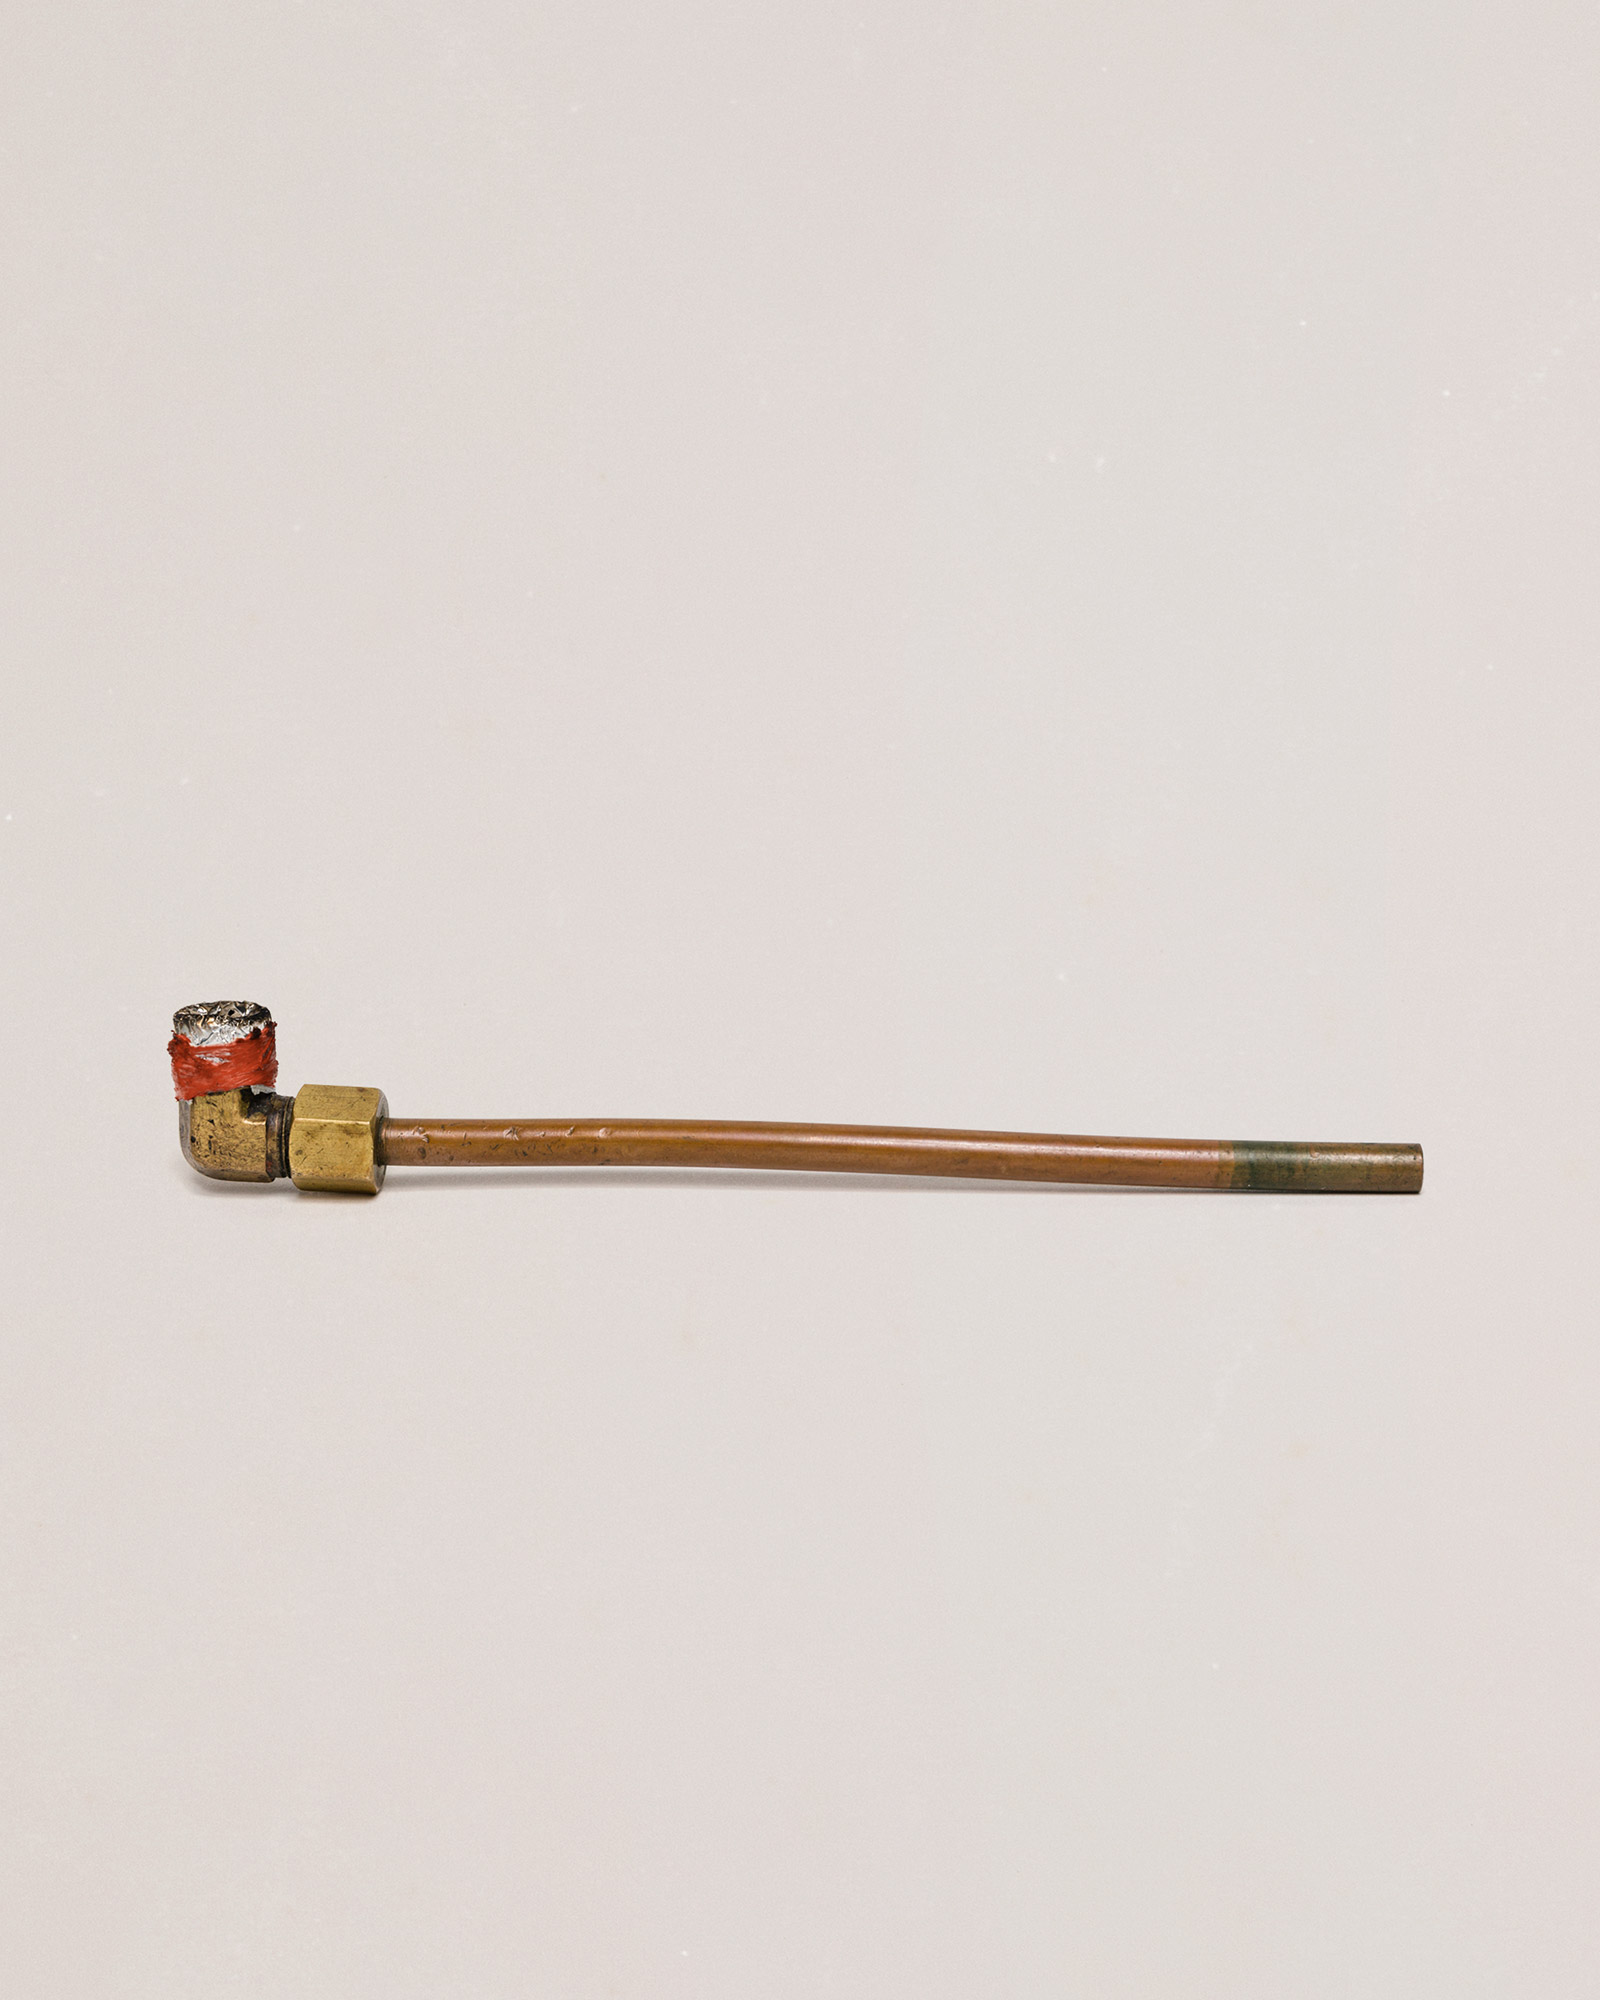 A drug pipe made of copper tube